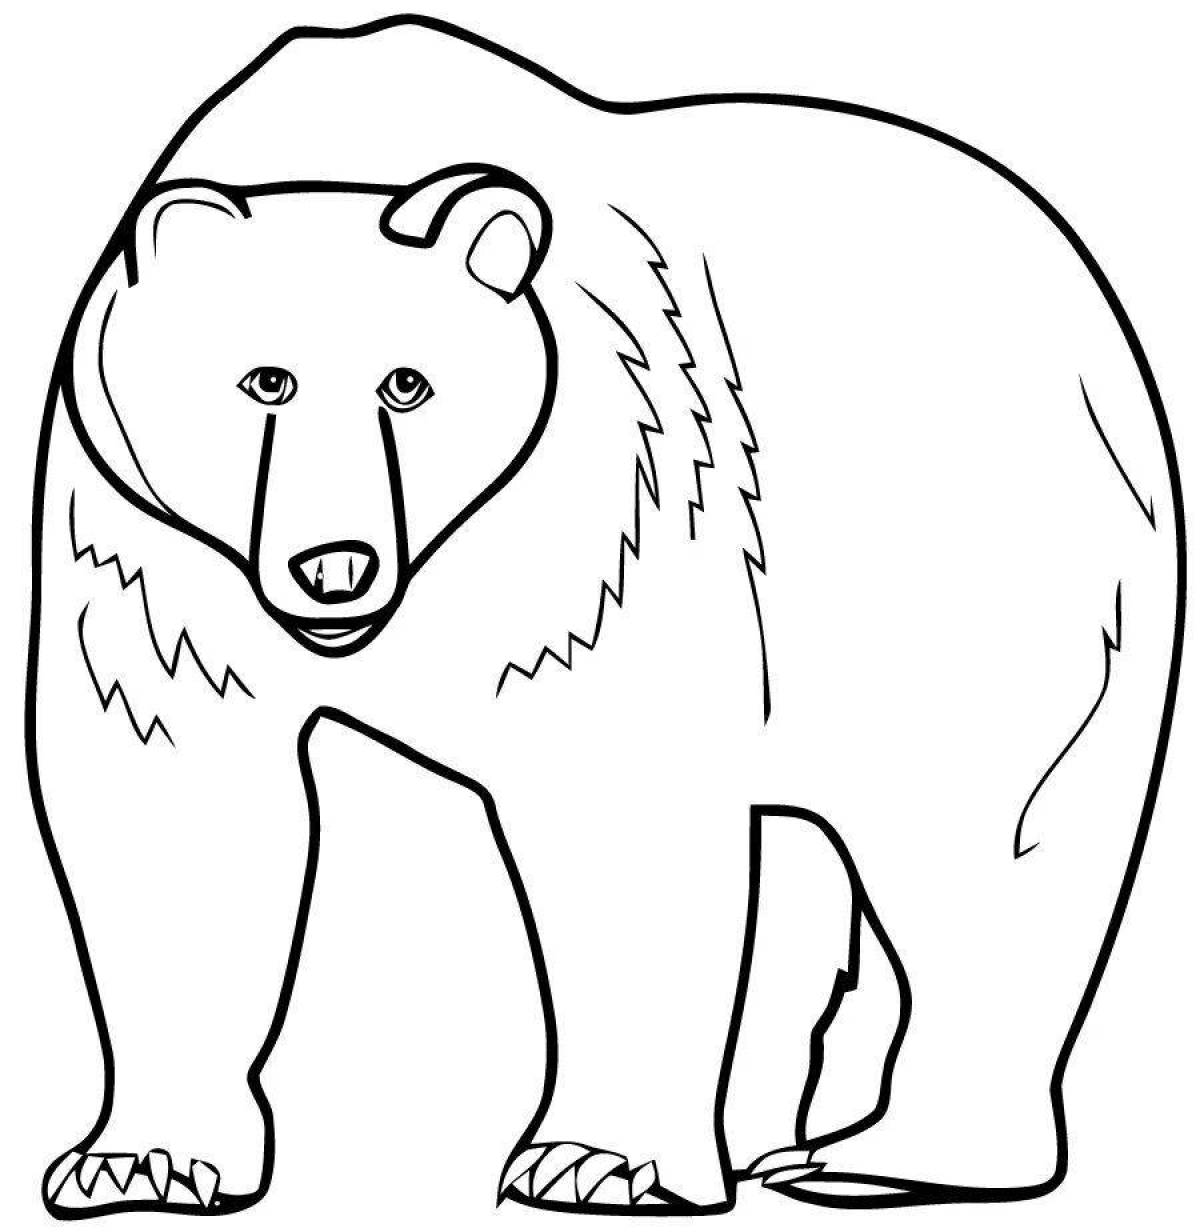 Animated drawing of a bear for children